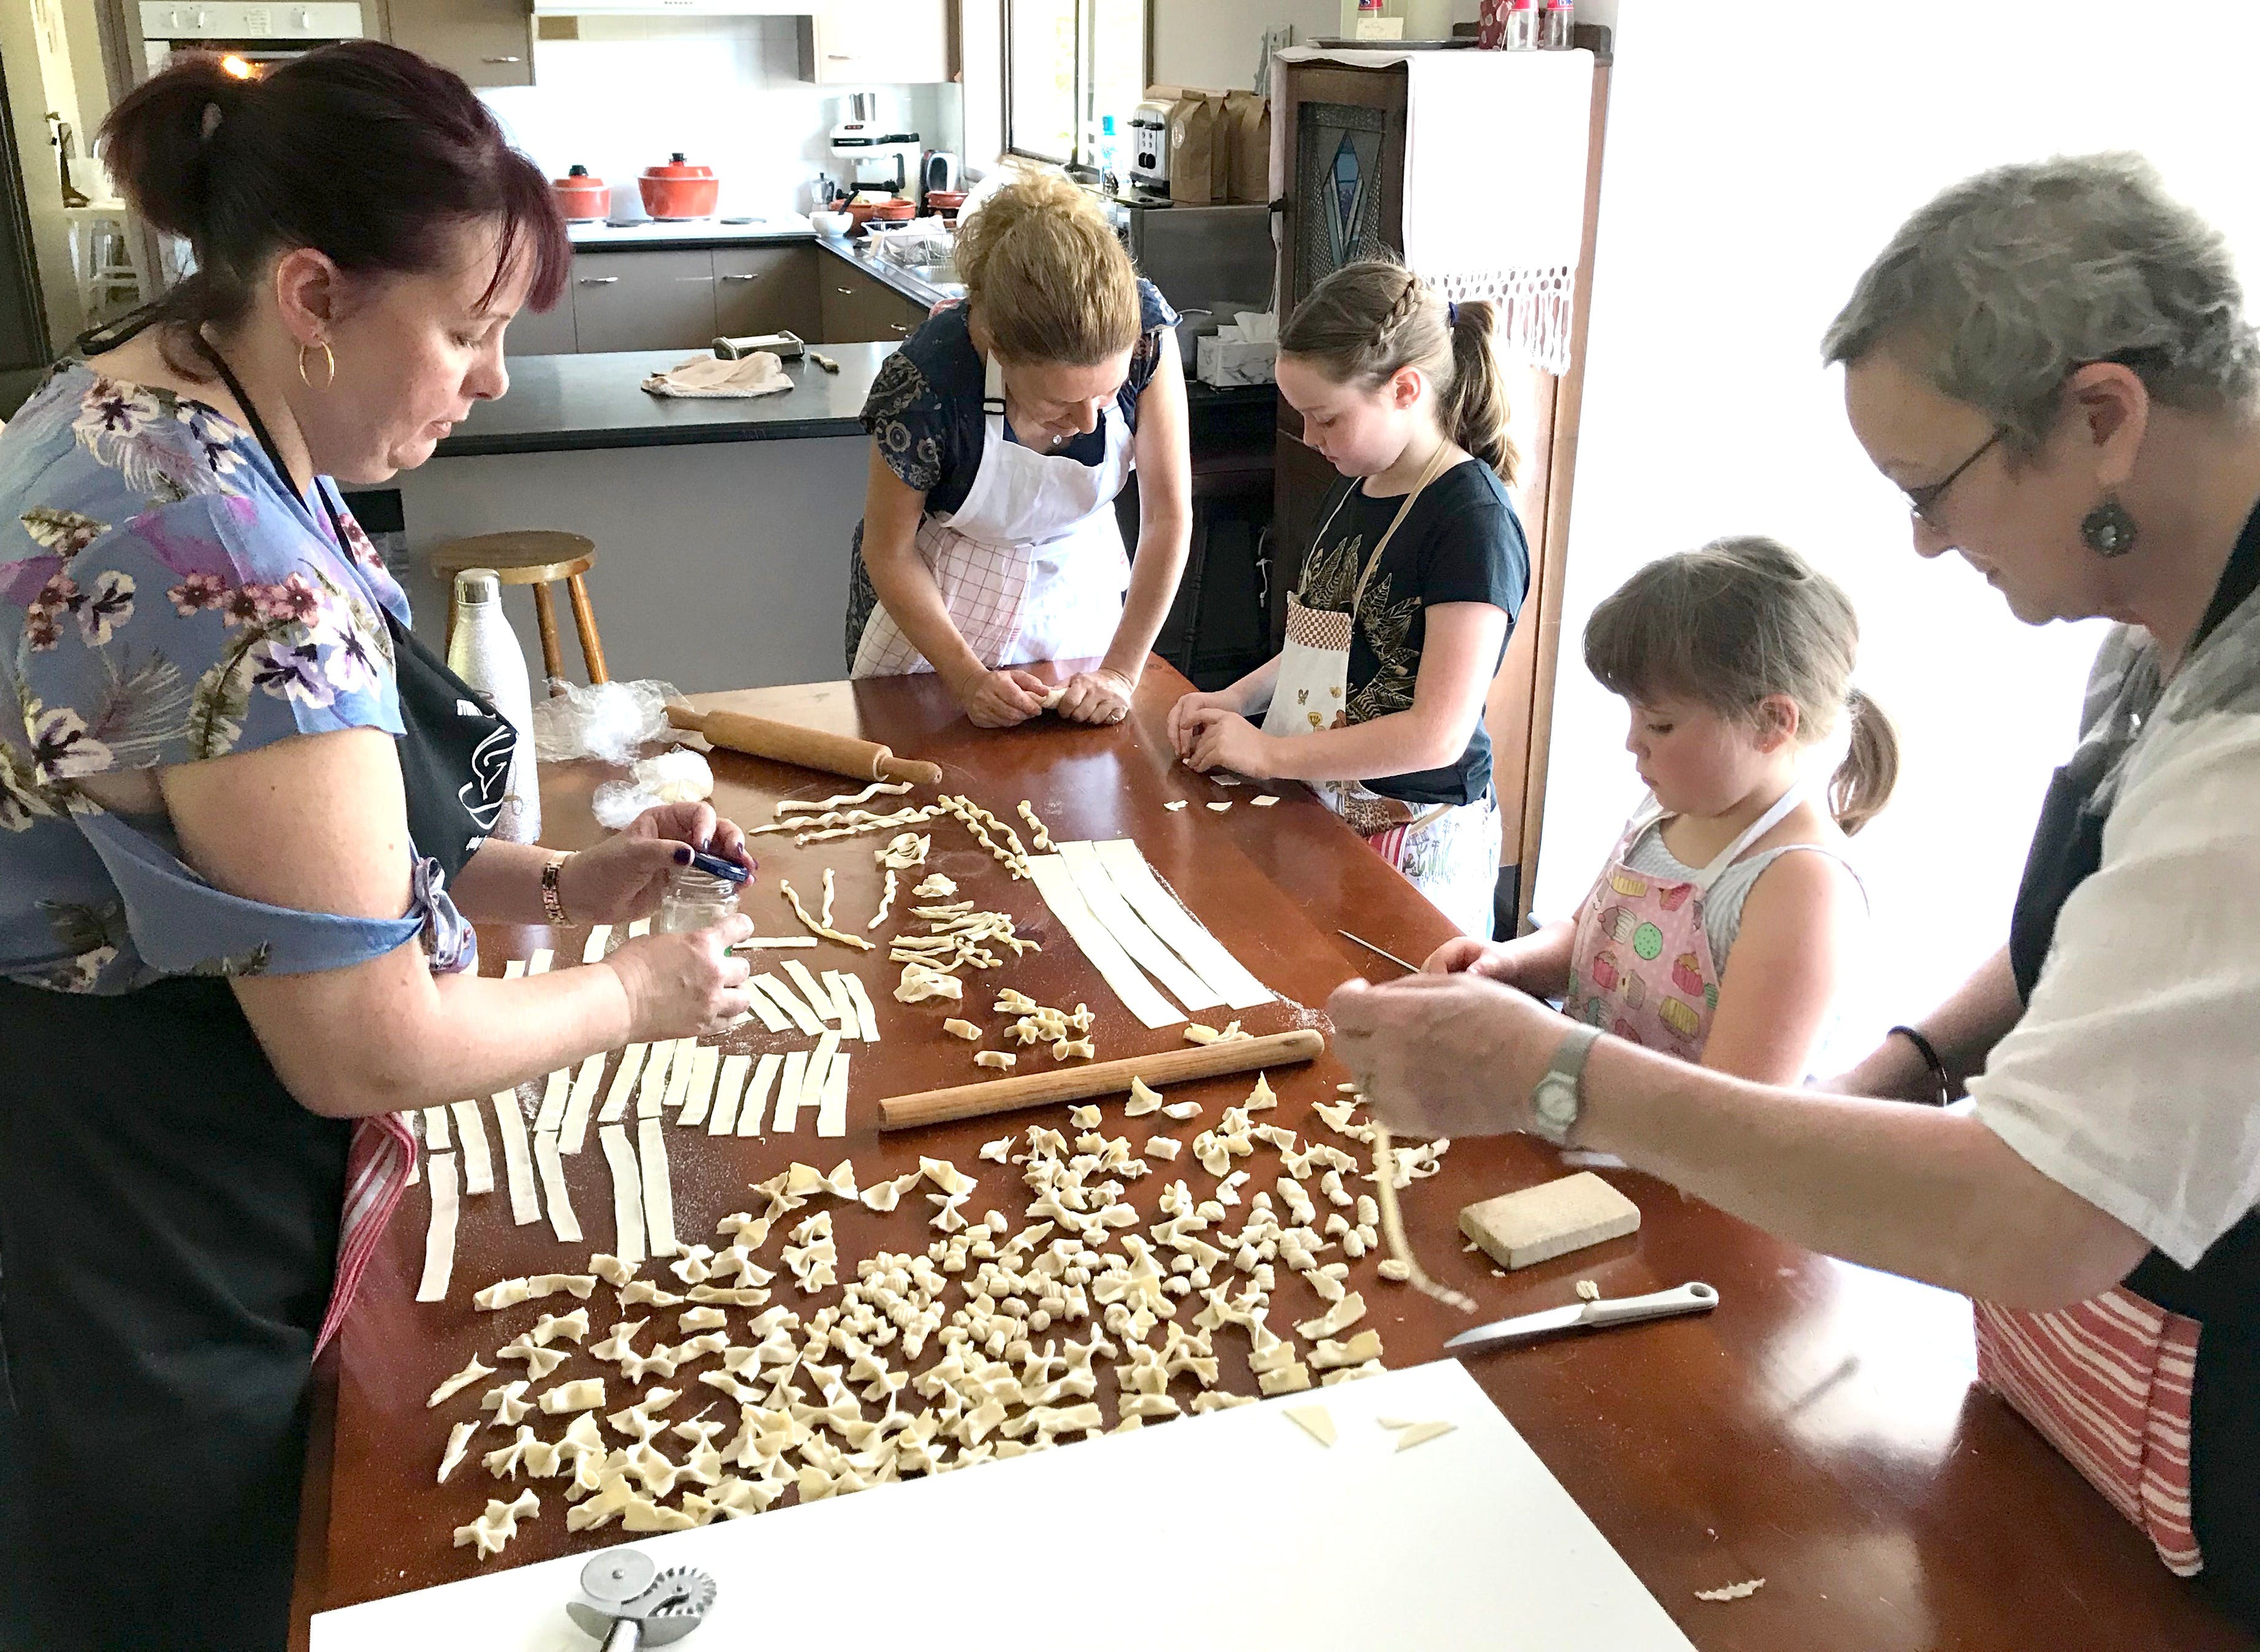 Kids Pasta Making Class - hands on fun at your house